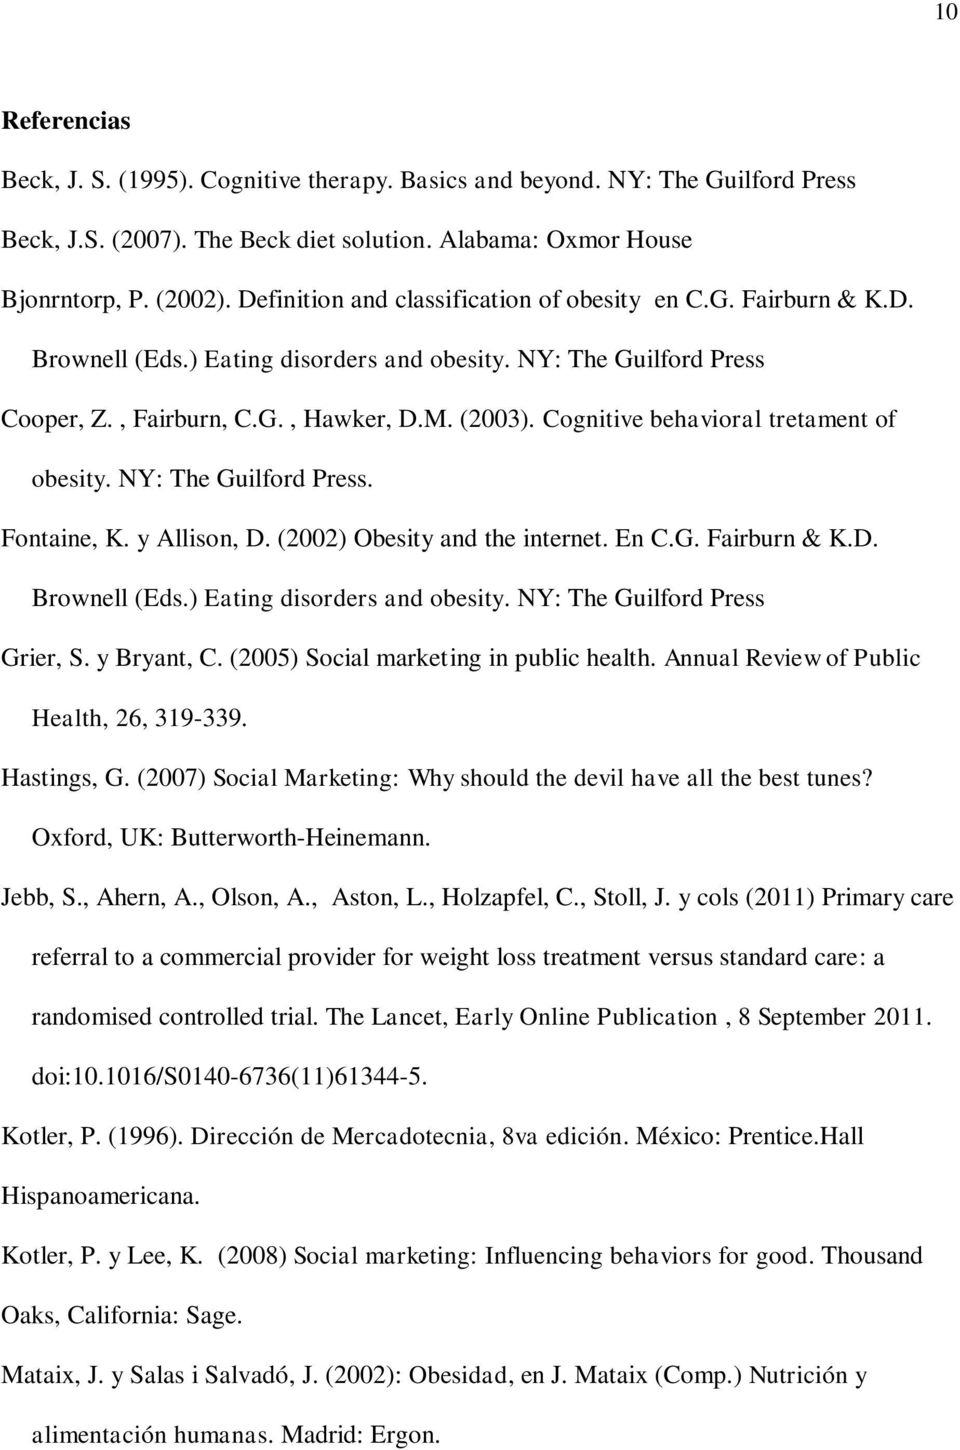 Cognitive behavioral tretament of obesity. NY: The Guilford Press. Fontaine, K. y Allison, D. (2002) Obesity and the internet. En C.G. Fairburn & K.D. Brownell (Eds.) Eating disorders and obesity.